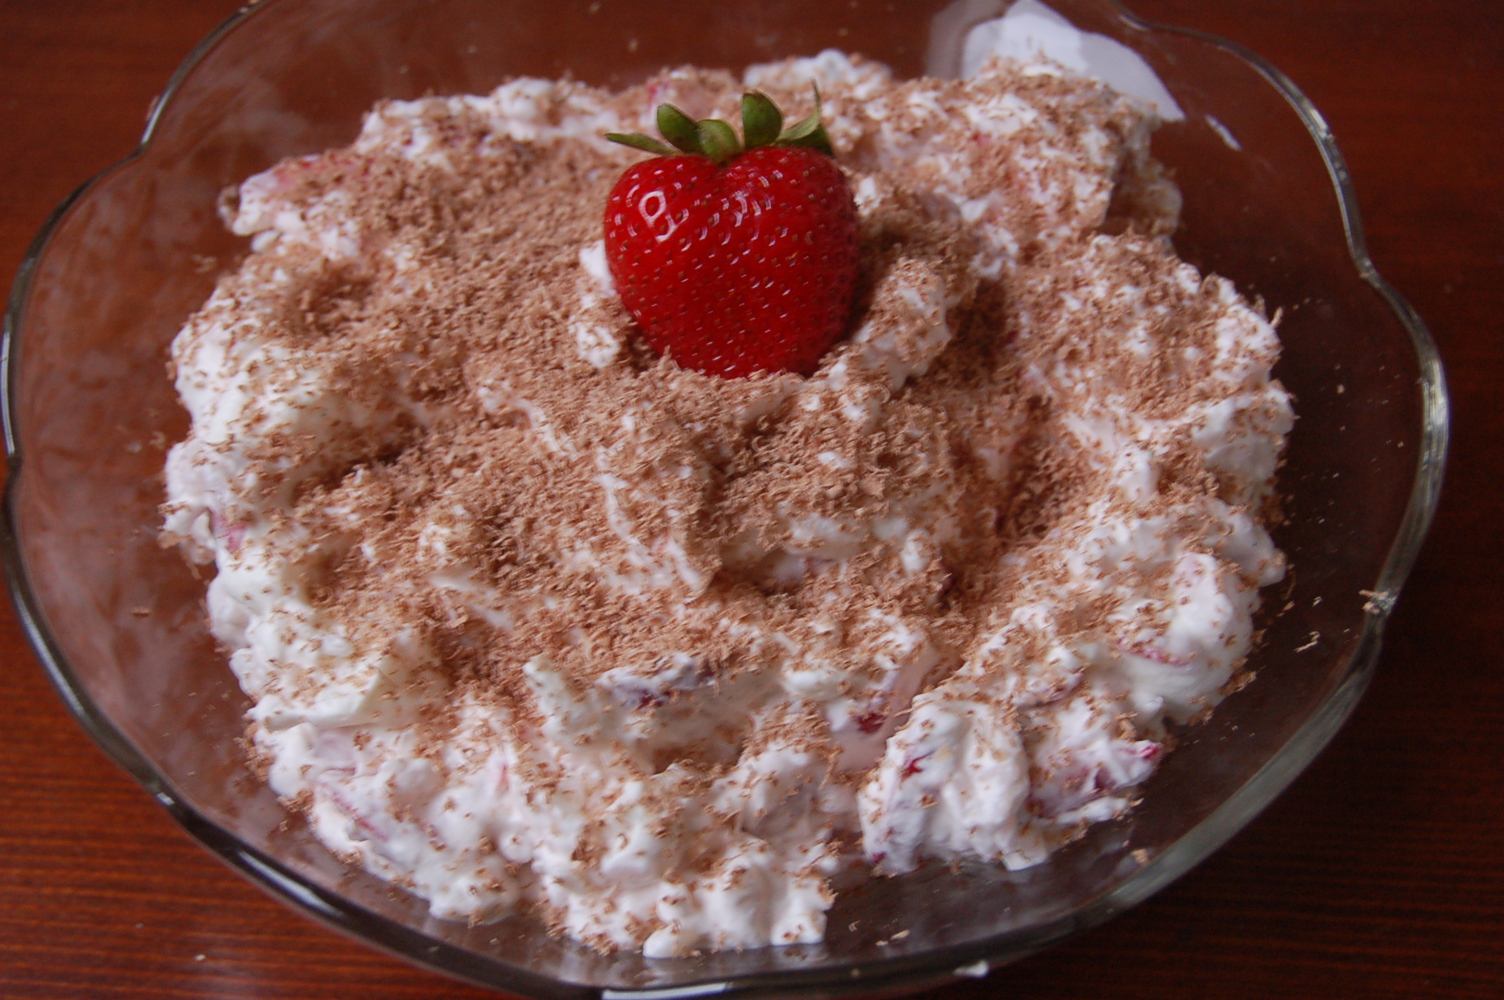 Leftover Rice Dessert with Strawberries